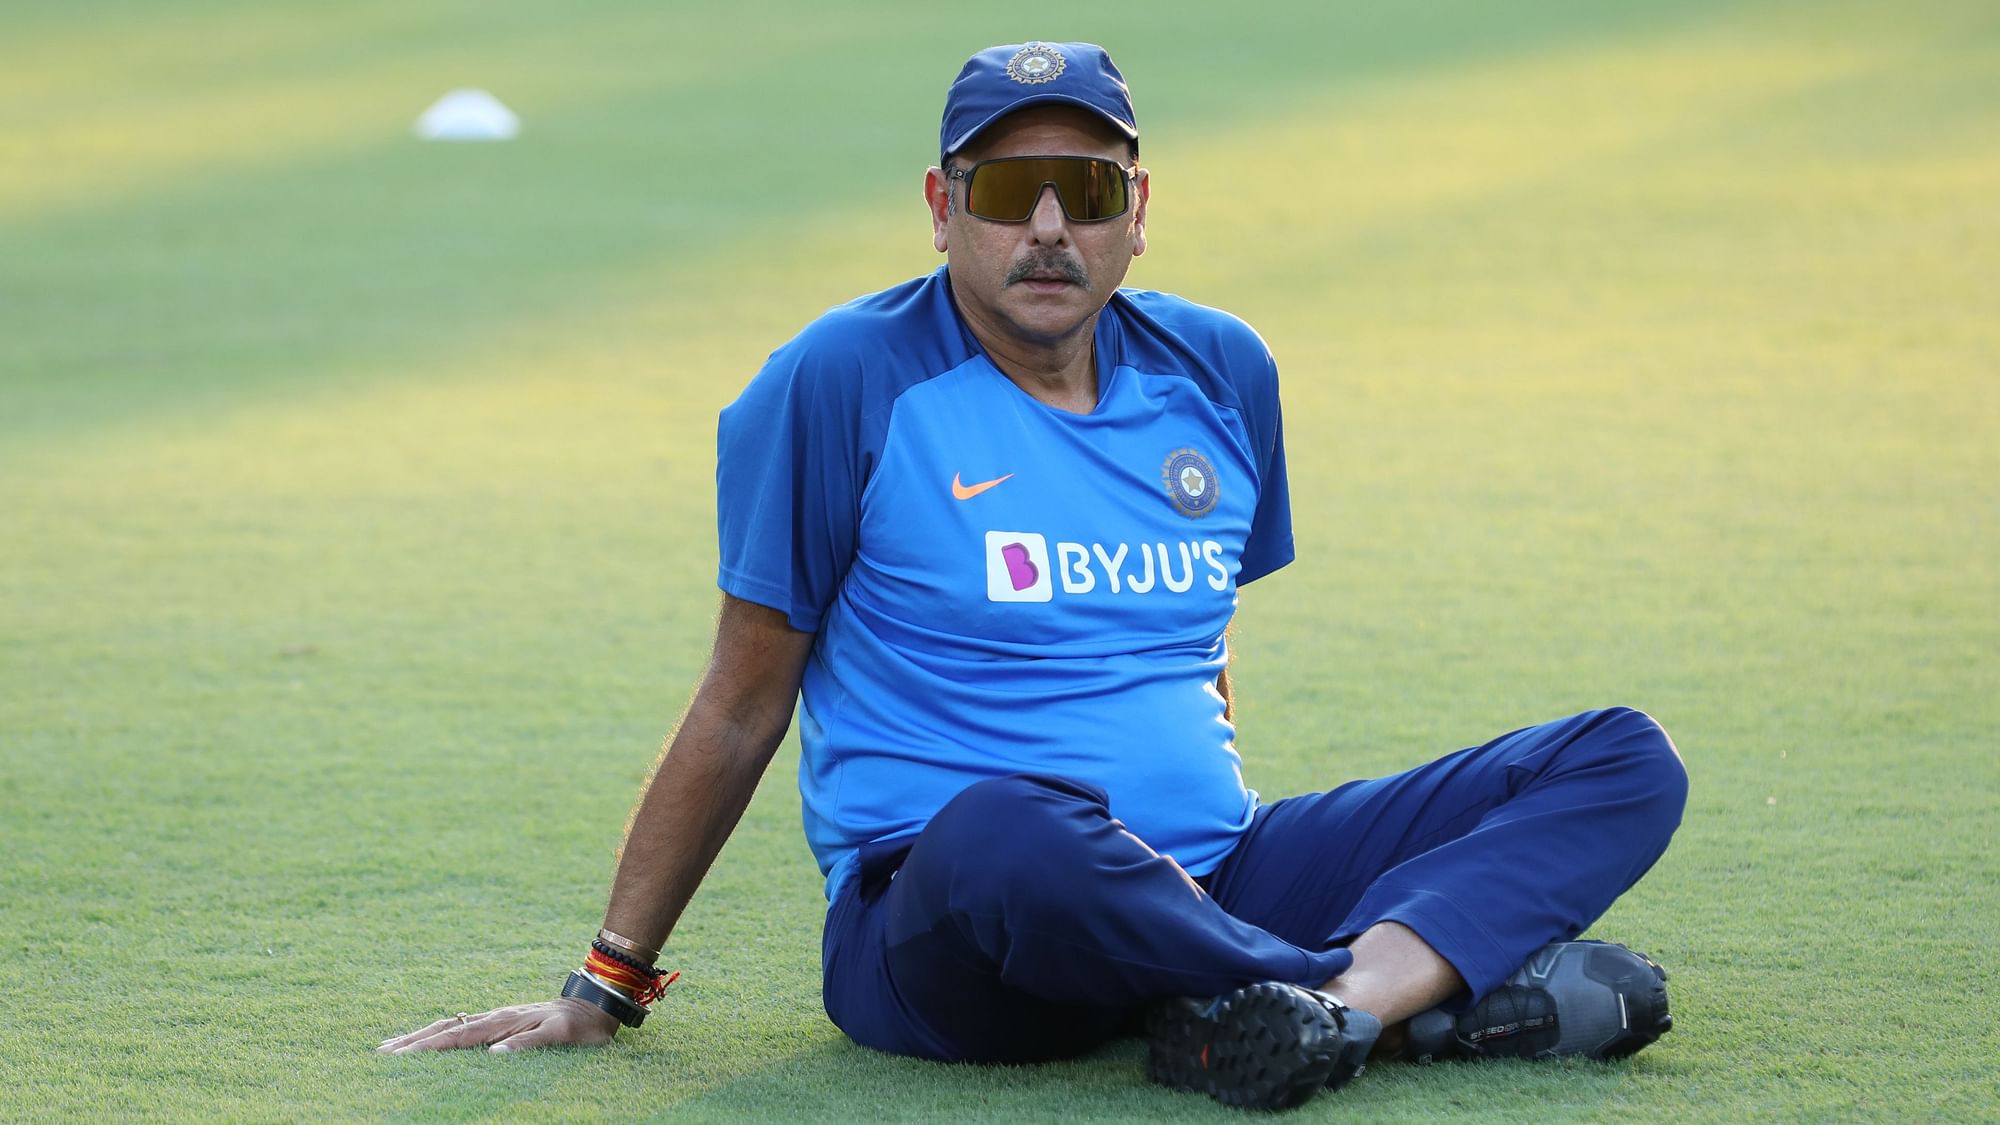 India head coach Ravi Shastri and his counterparts with the A and junior teams discussed future plans for their respective sides.